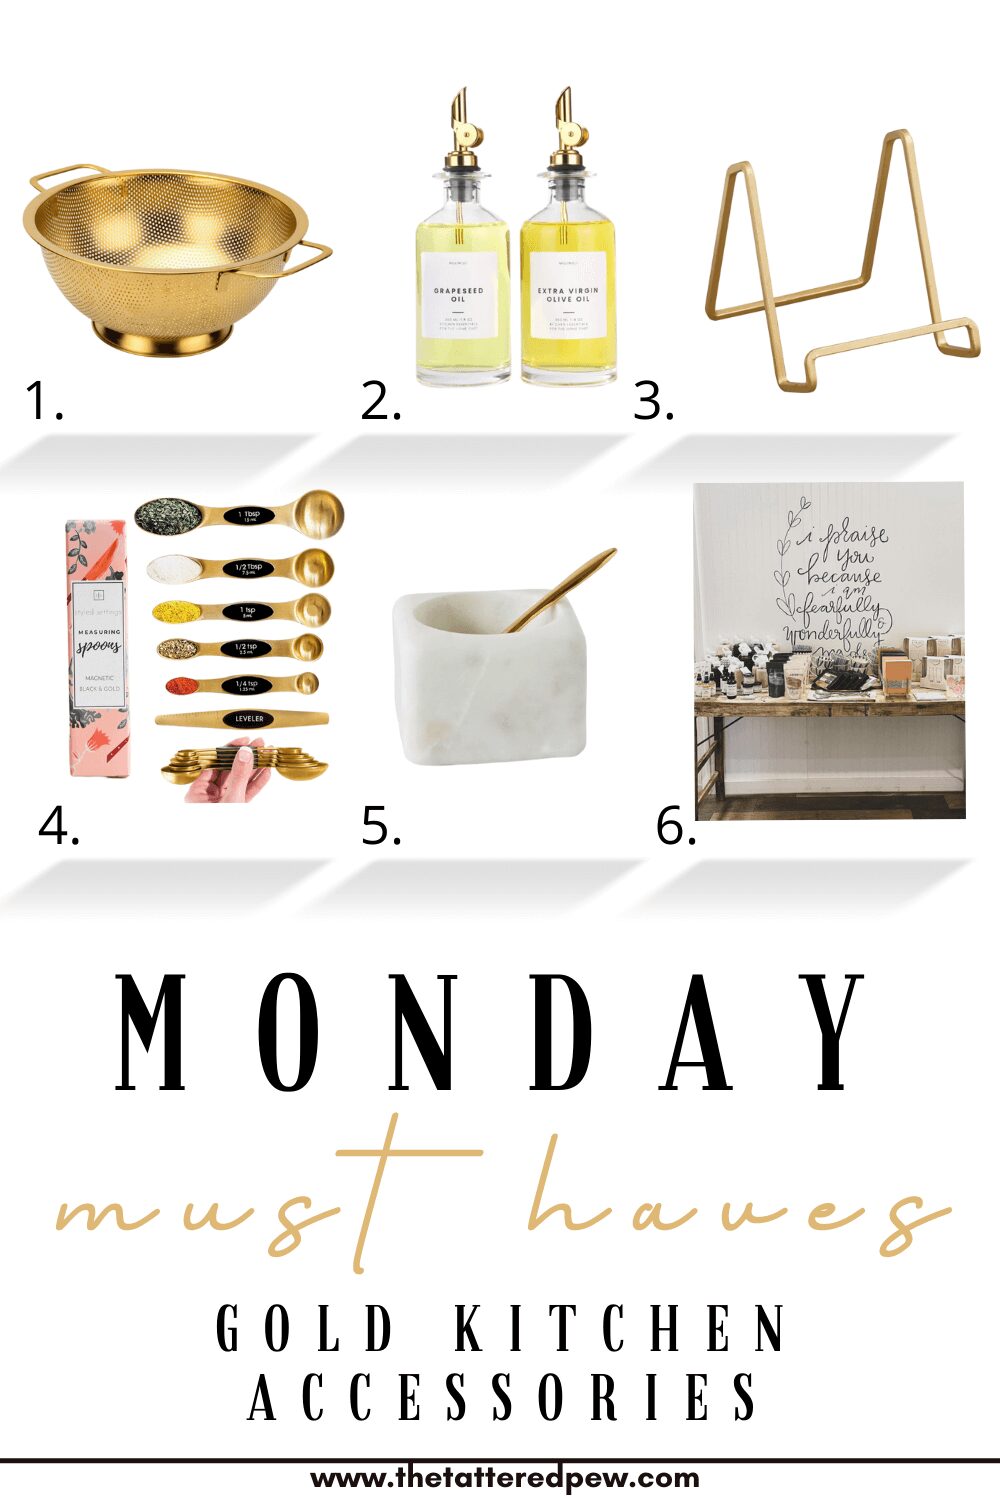 https://www.thetatteredpew.com/wp-content/uploads/Monday-must-haves-gold-kitchen-accessories-1.jpg